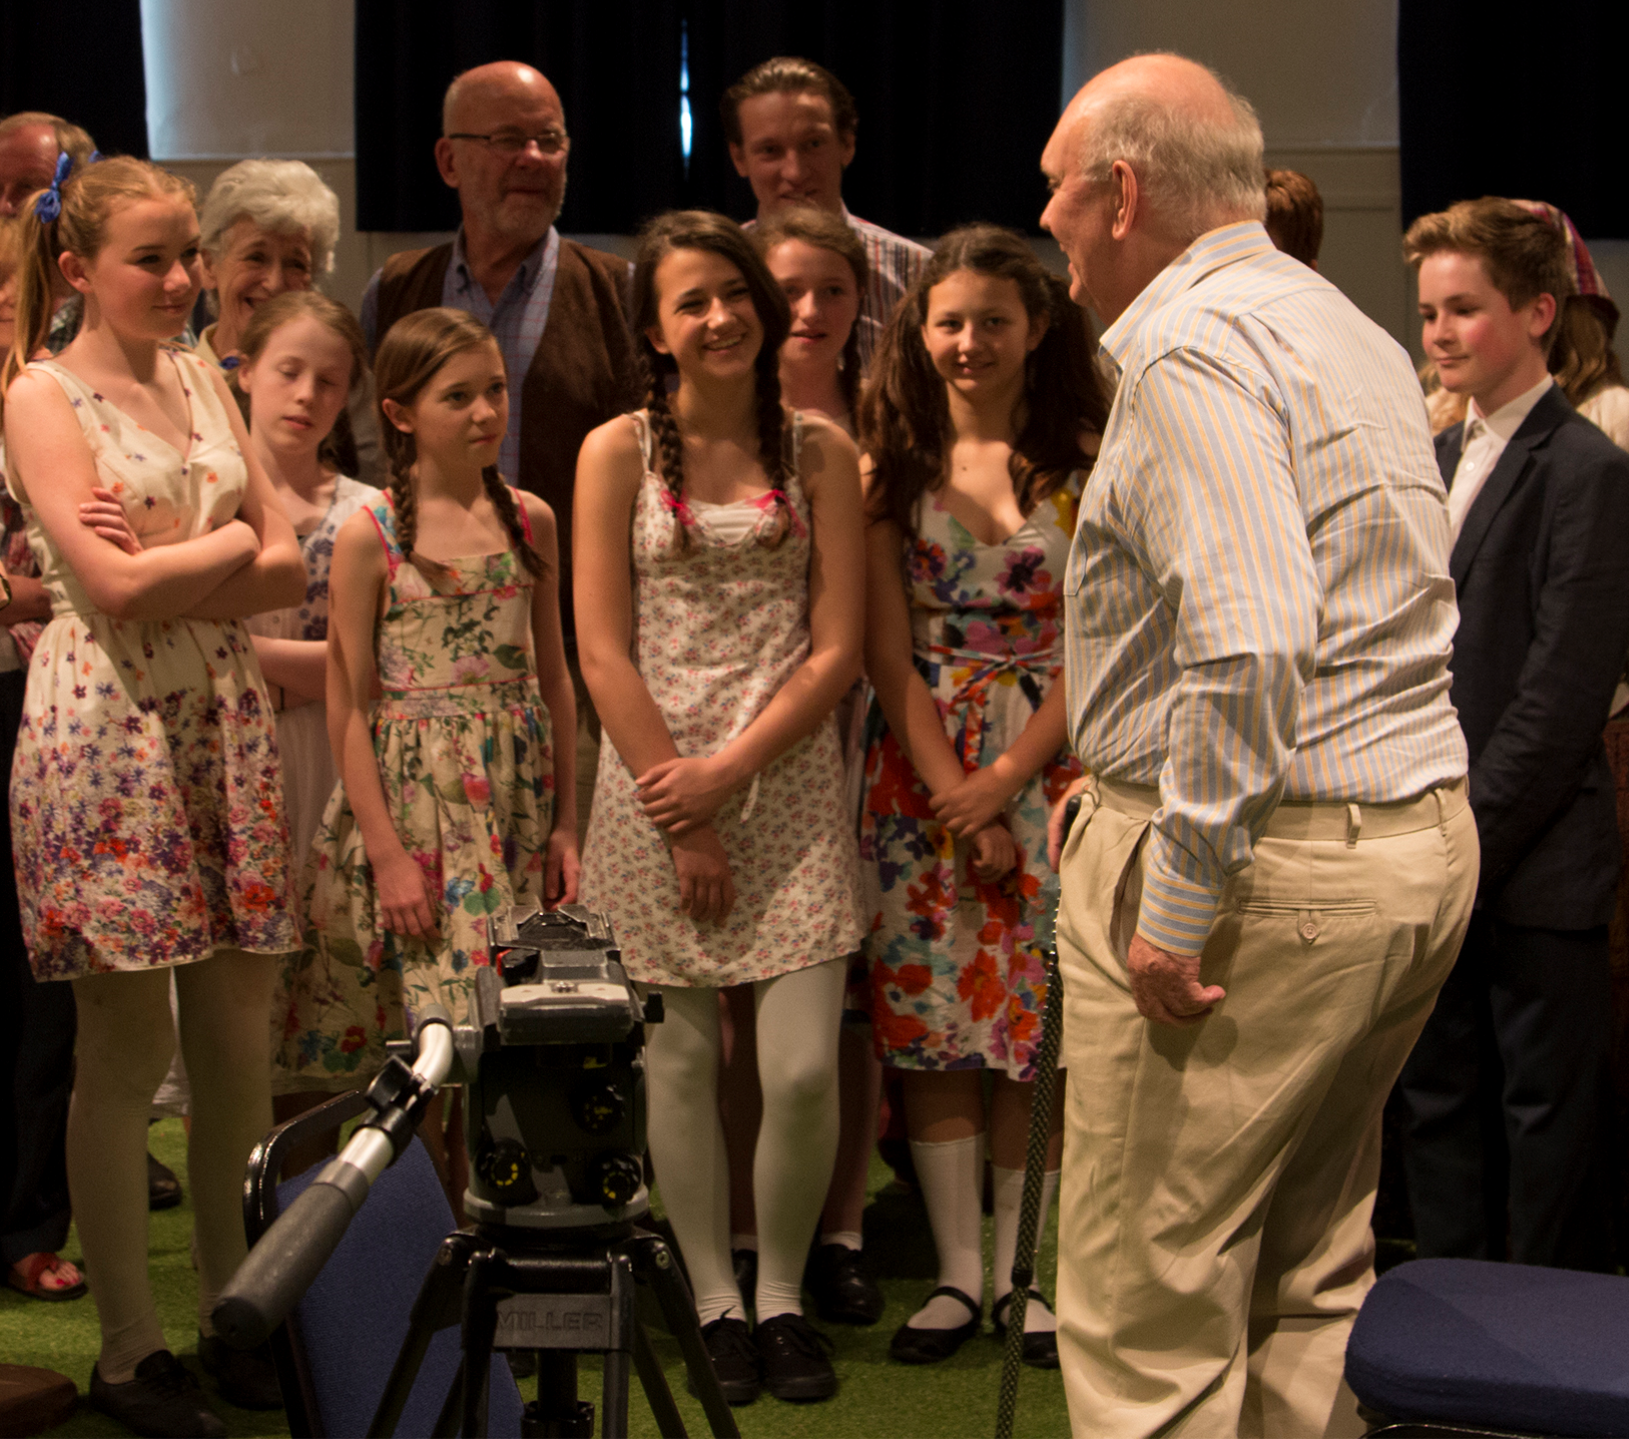 Sir Alan Ayckbourn meeting the Next Stage Youth Members of the cast of his own play House and Garden, 2014